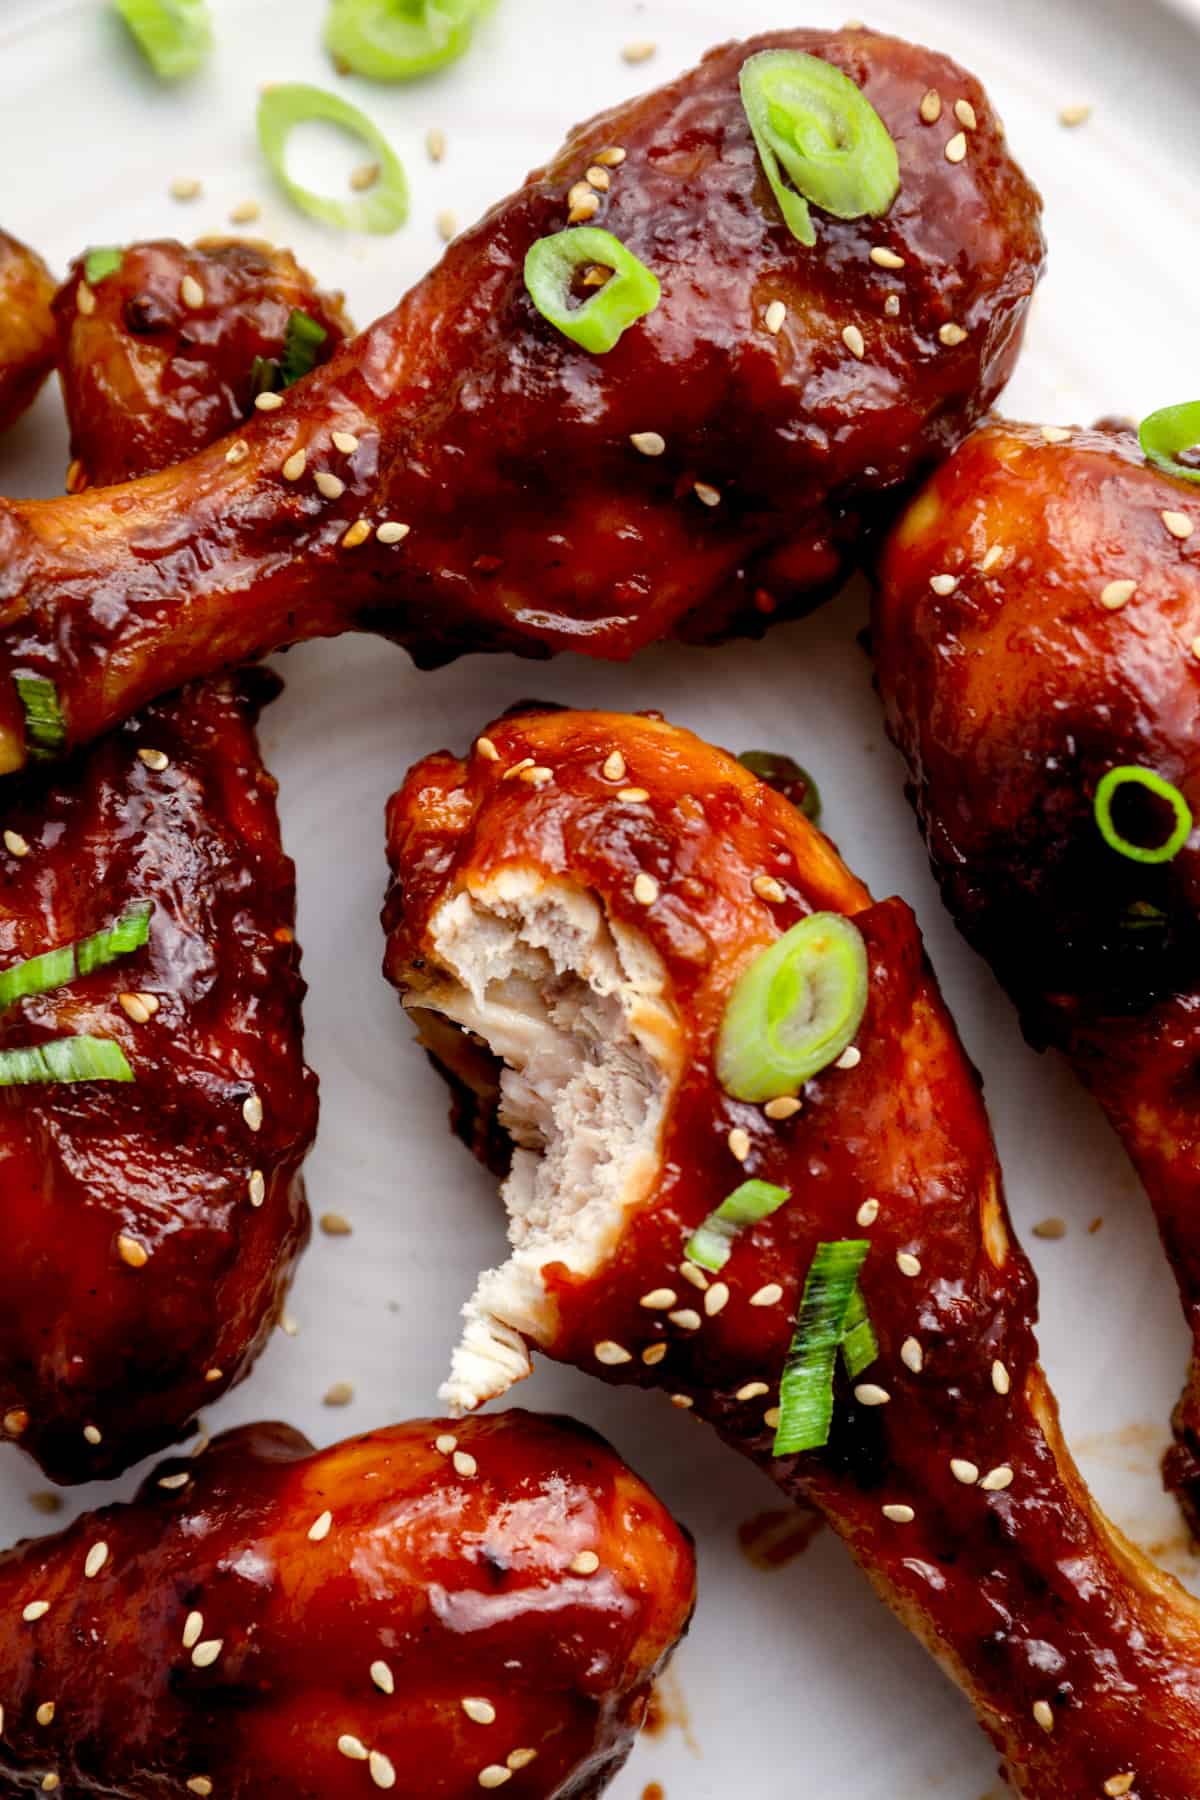 baked teriyaki chicken drumsticks, one has a bite taken out